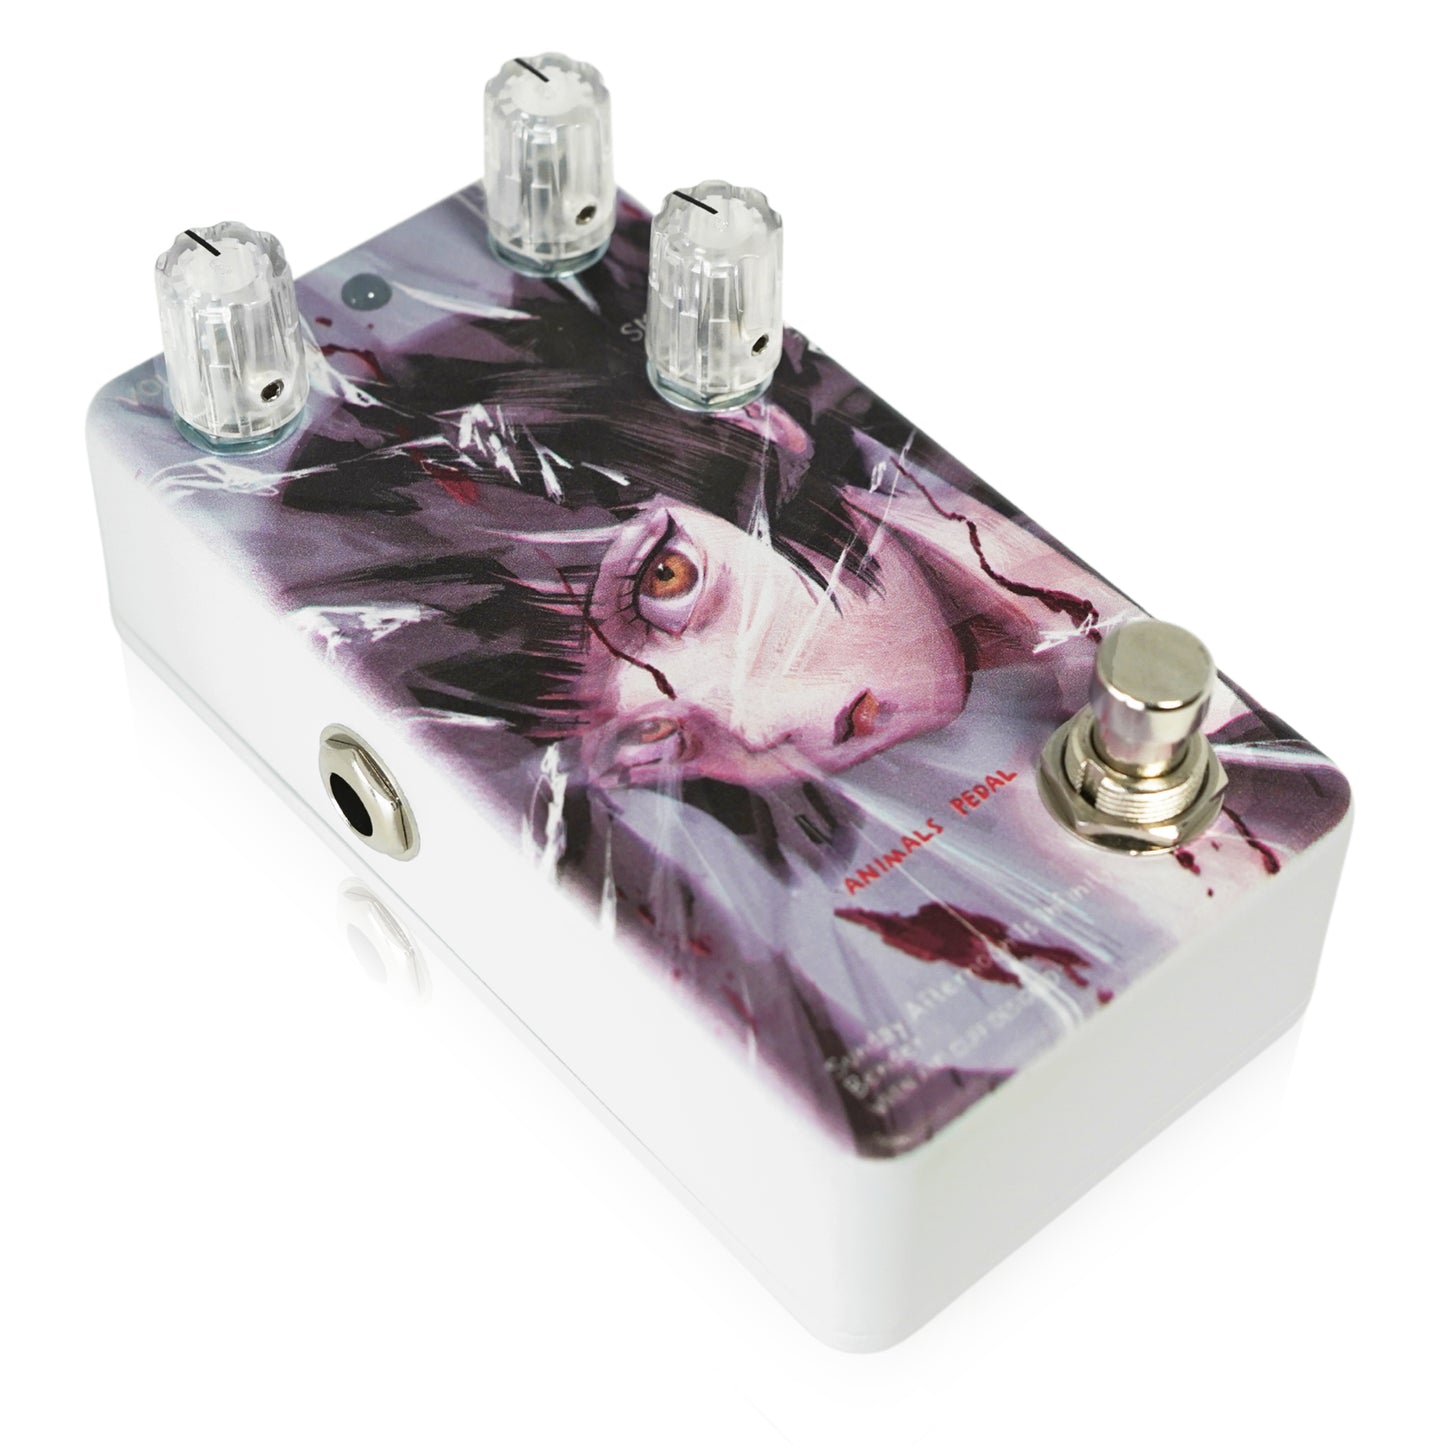 Animals Pedal Custom Illustrated 046 Sunday Afternoon Is Infinity Bender by 100年 "無題"